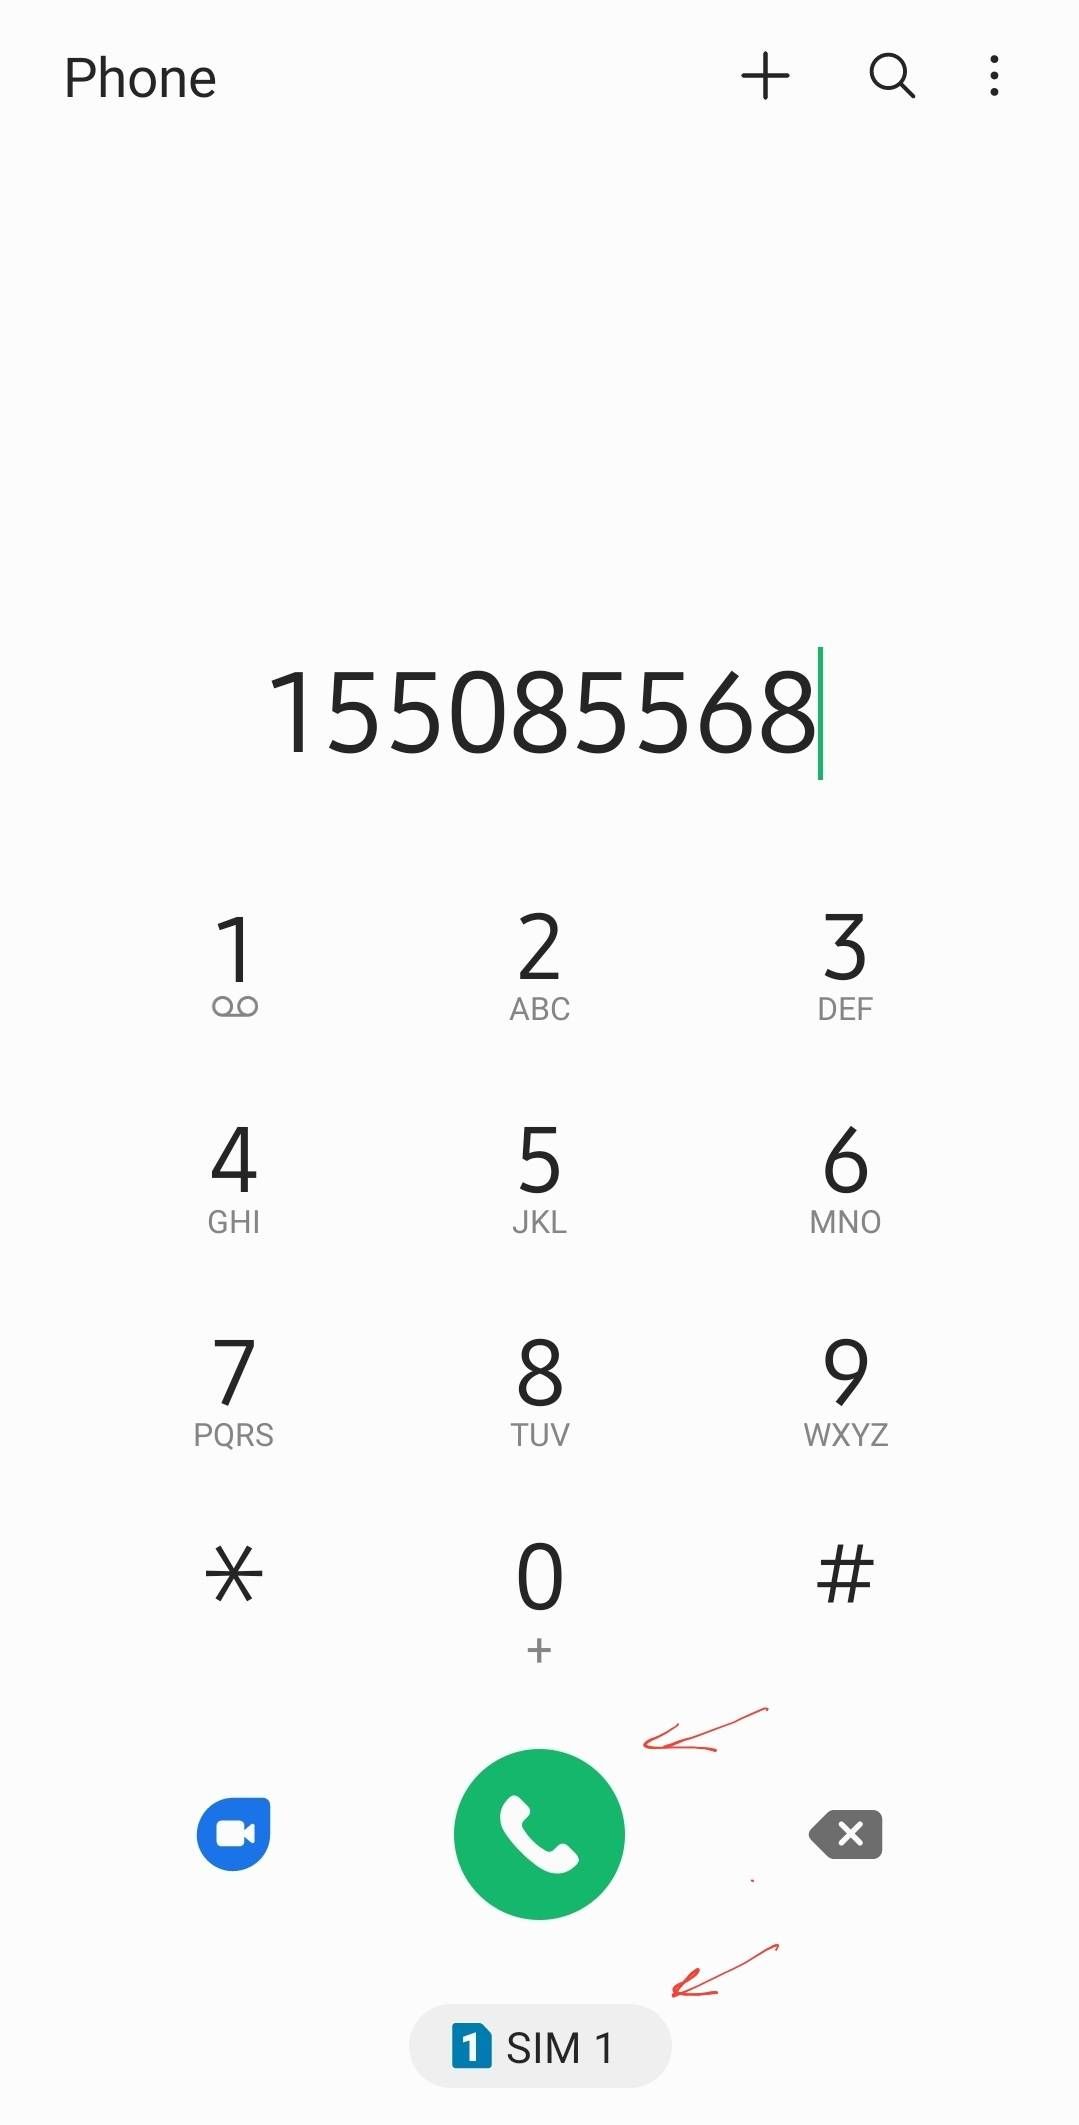 I don't like One Ui 3.0 Phone dialer - Page 2 - Samsung Members